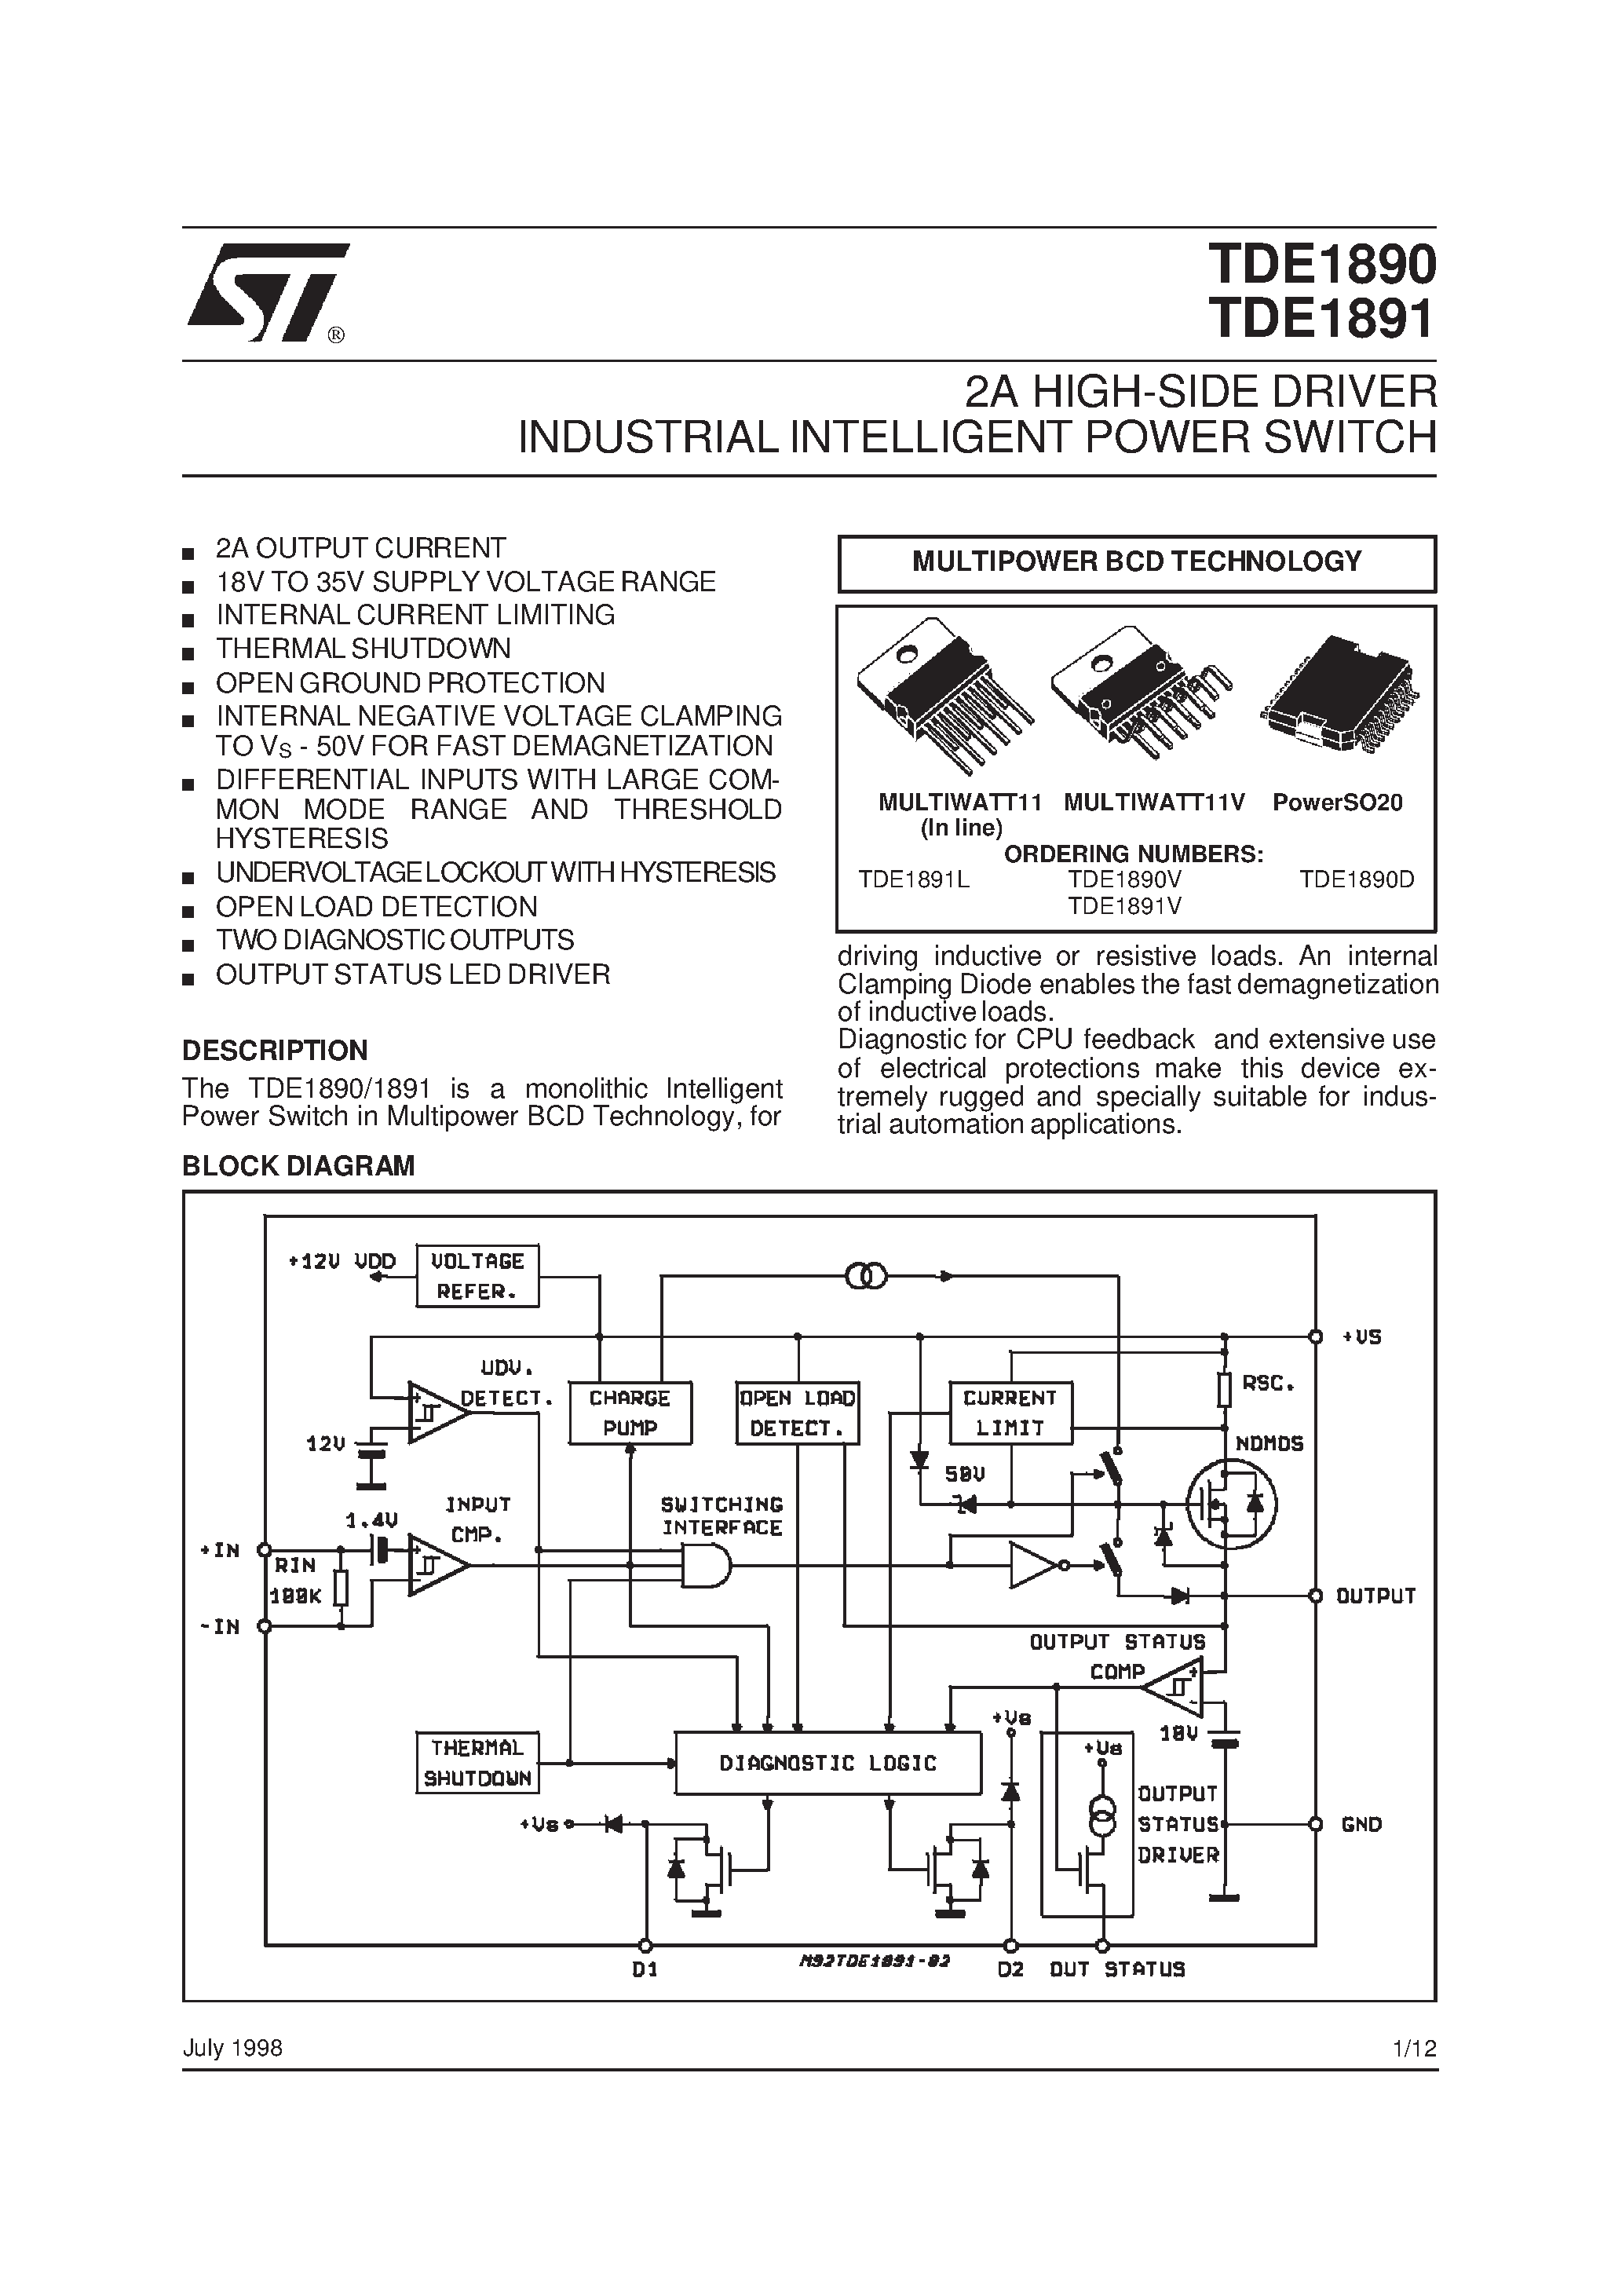 Даташит TDE1890 - 2A HIGH-SIDE DRIVER INDUSTRIAL INTELLIGENT POWER SWITCH страница 1